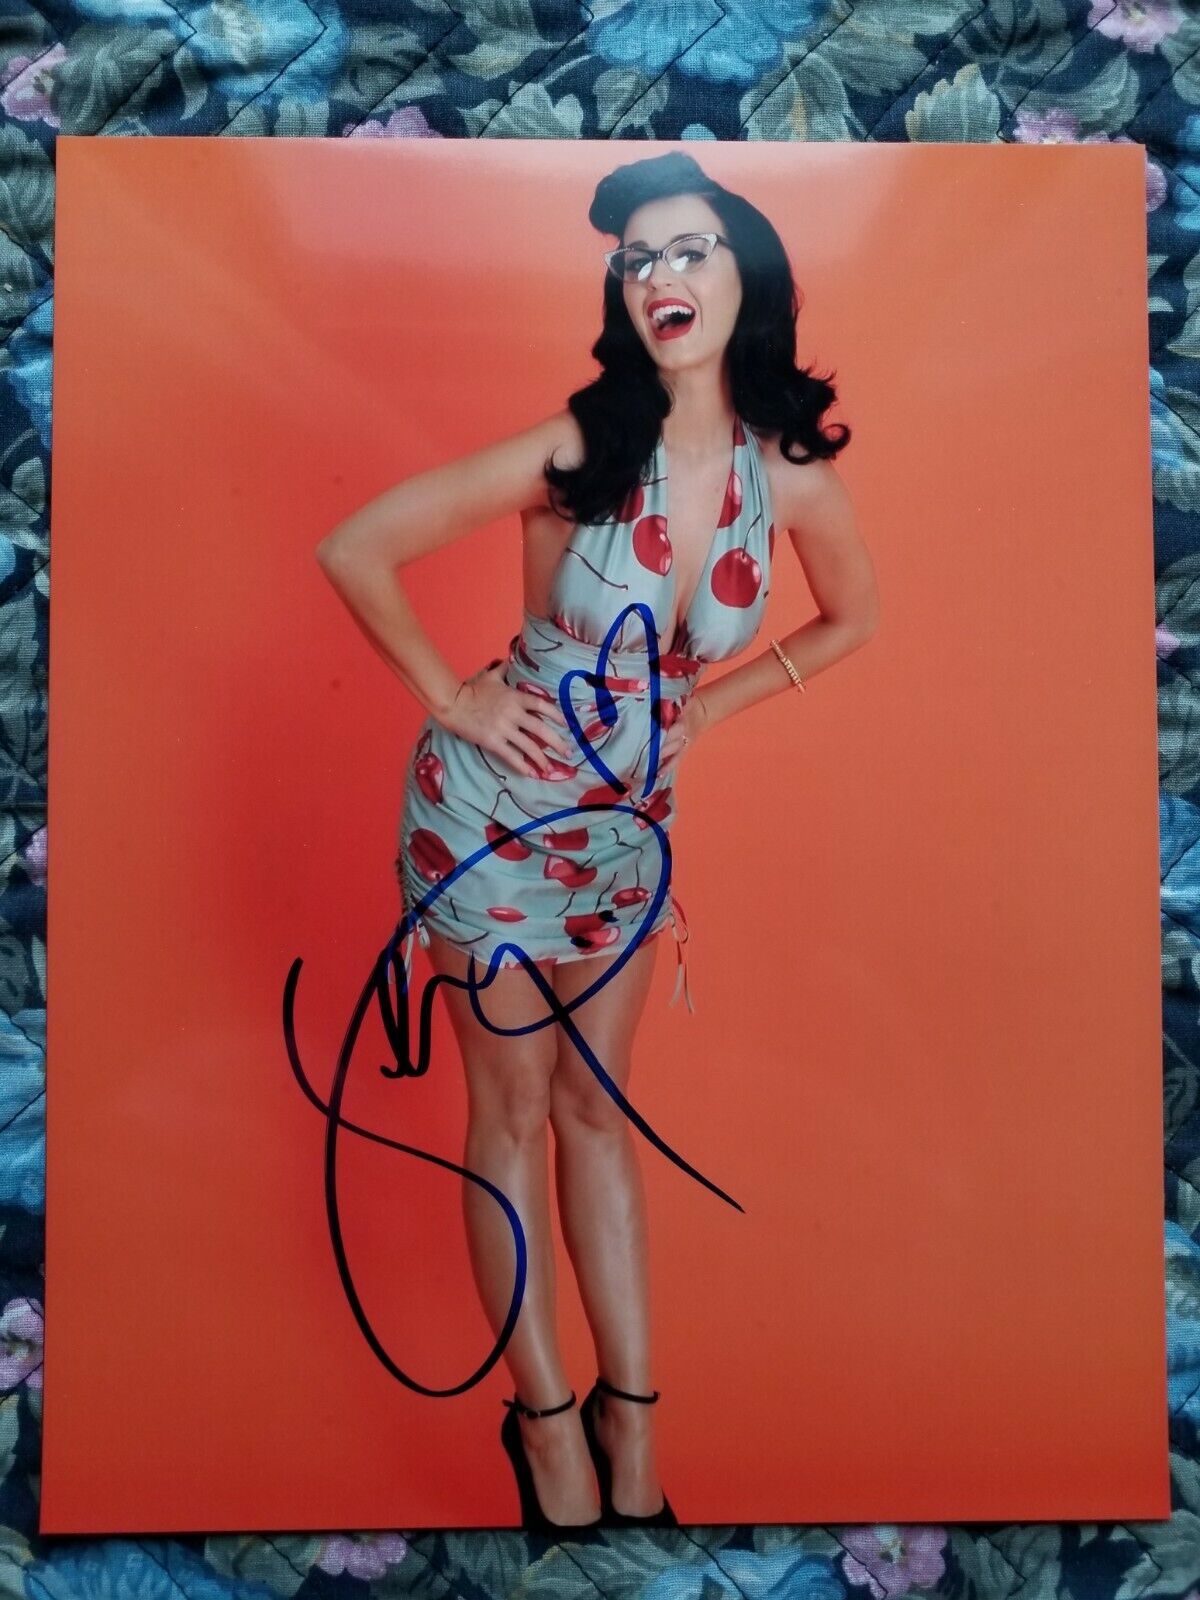 Katy Perry Authentic Hand Signed 8x10 Photo Poster painting Autographed Singer